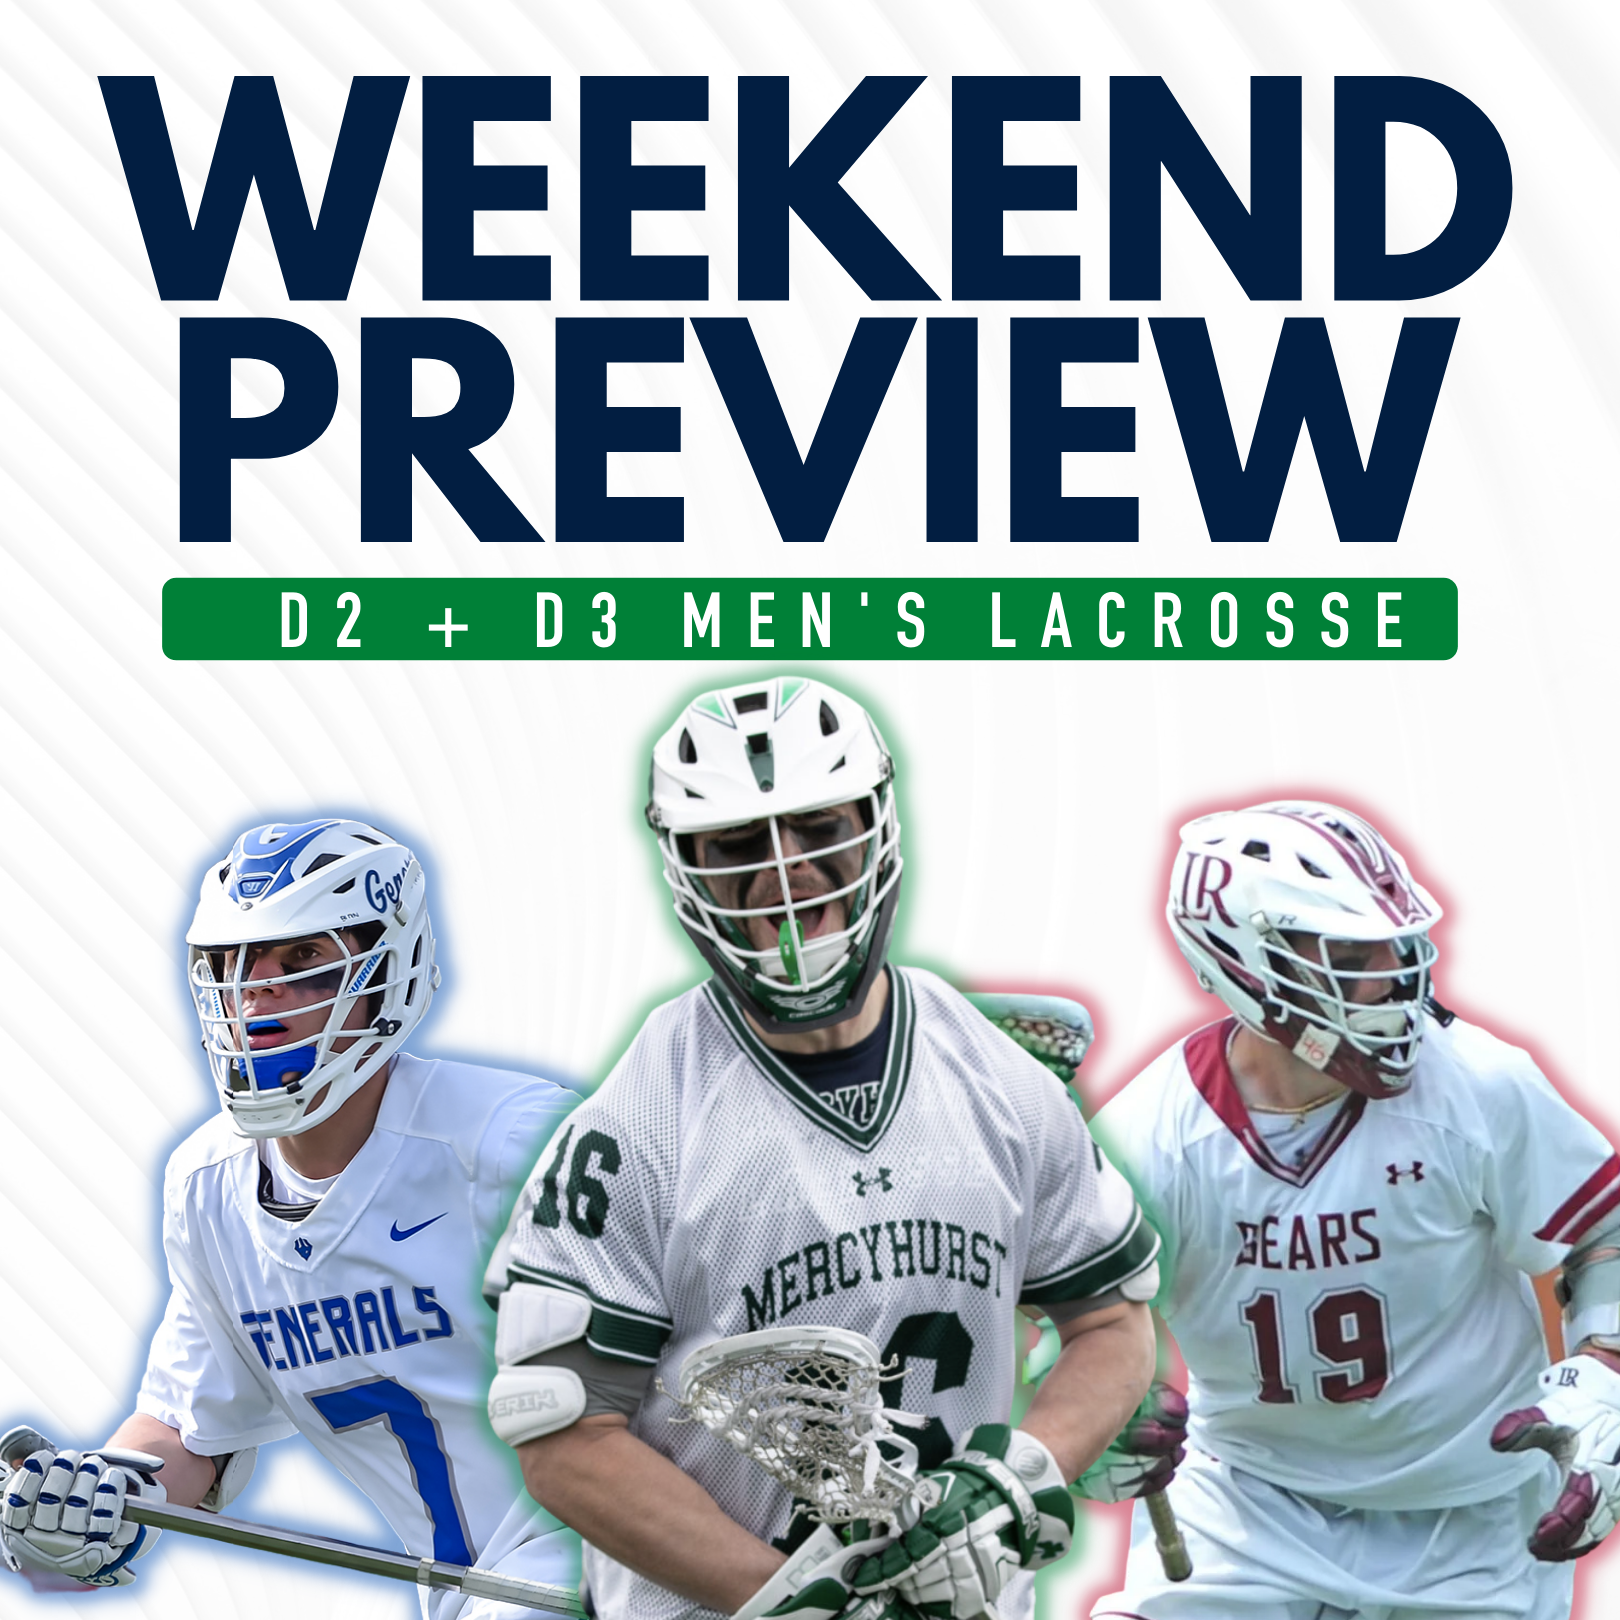 D2+D3 Lacrosse Weekend Preview February 12, 2022 Lacrosse All Stars